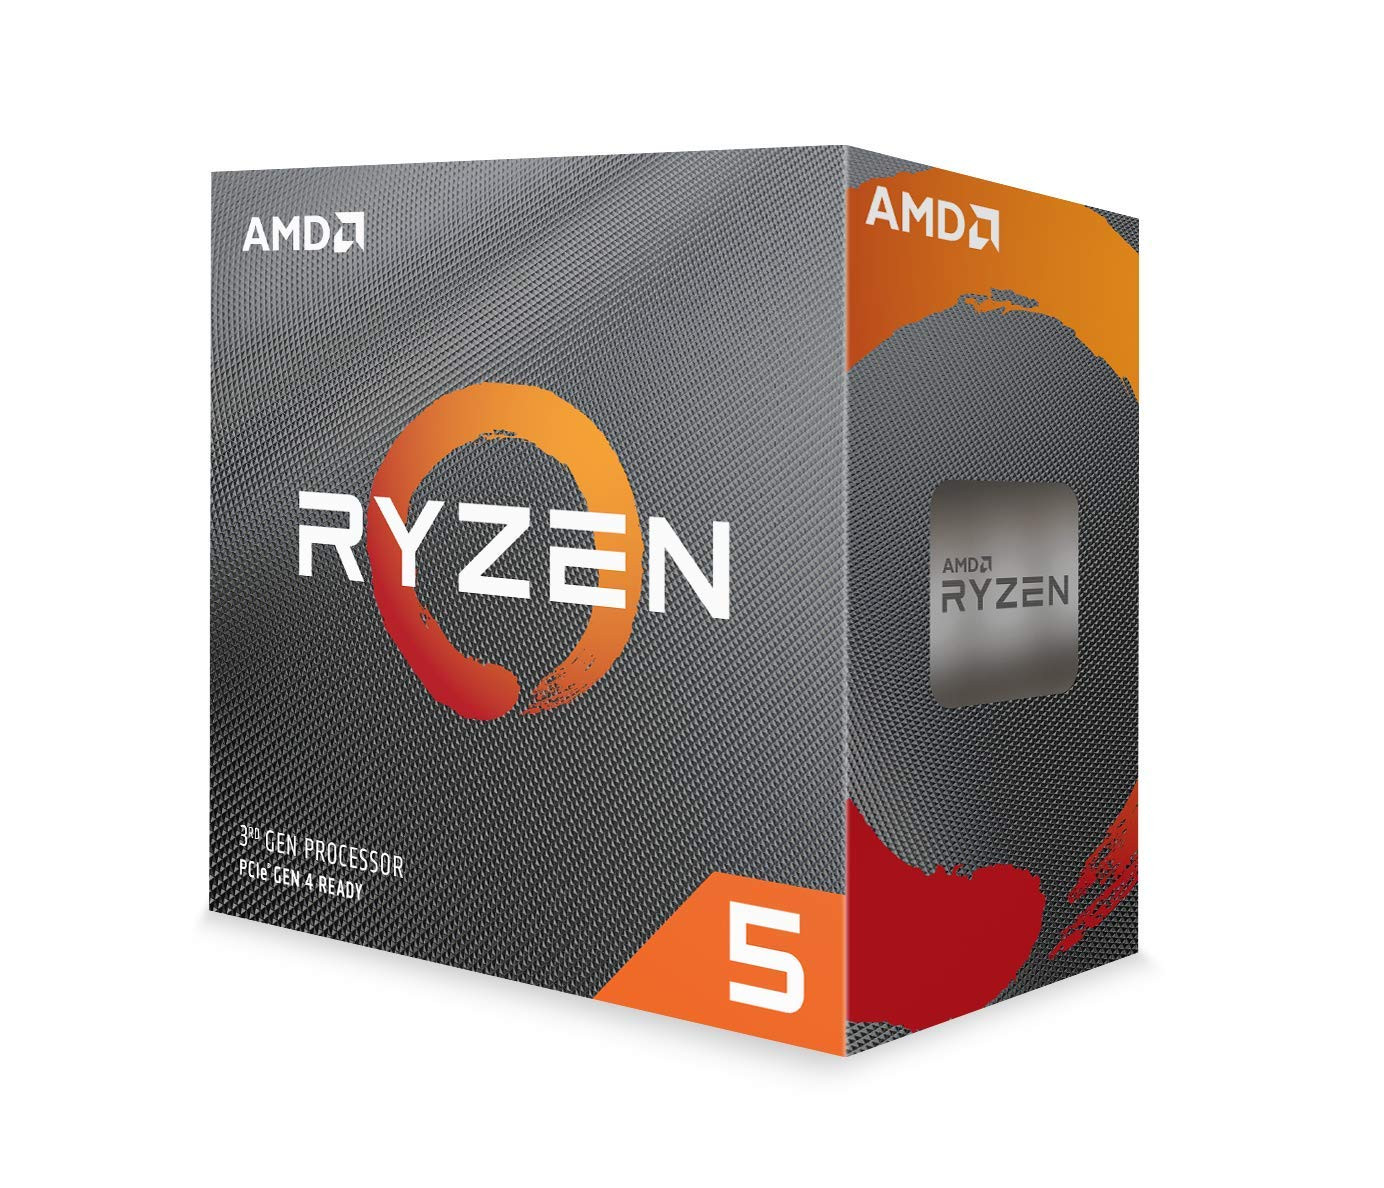 AMD Ryzen 5 3600 Processor (6C/12T, 35MB Cache, 4.2 GHz Max Boost) * Get 3 Mon ths Of Xbox Game